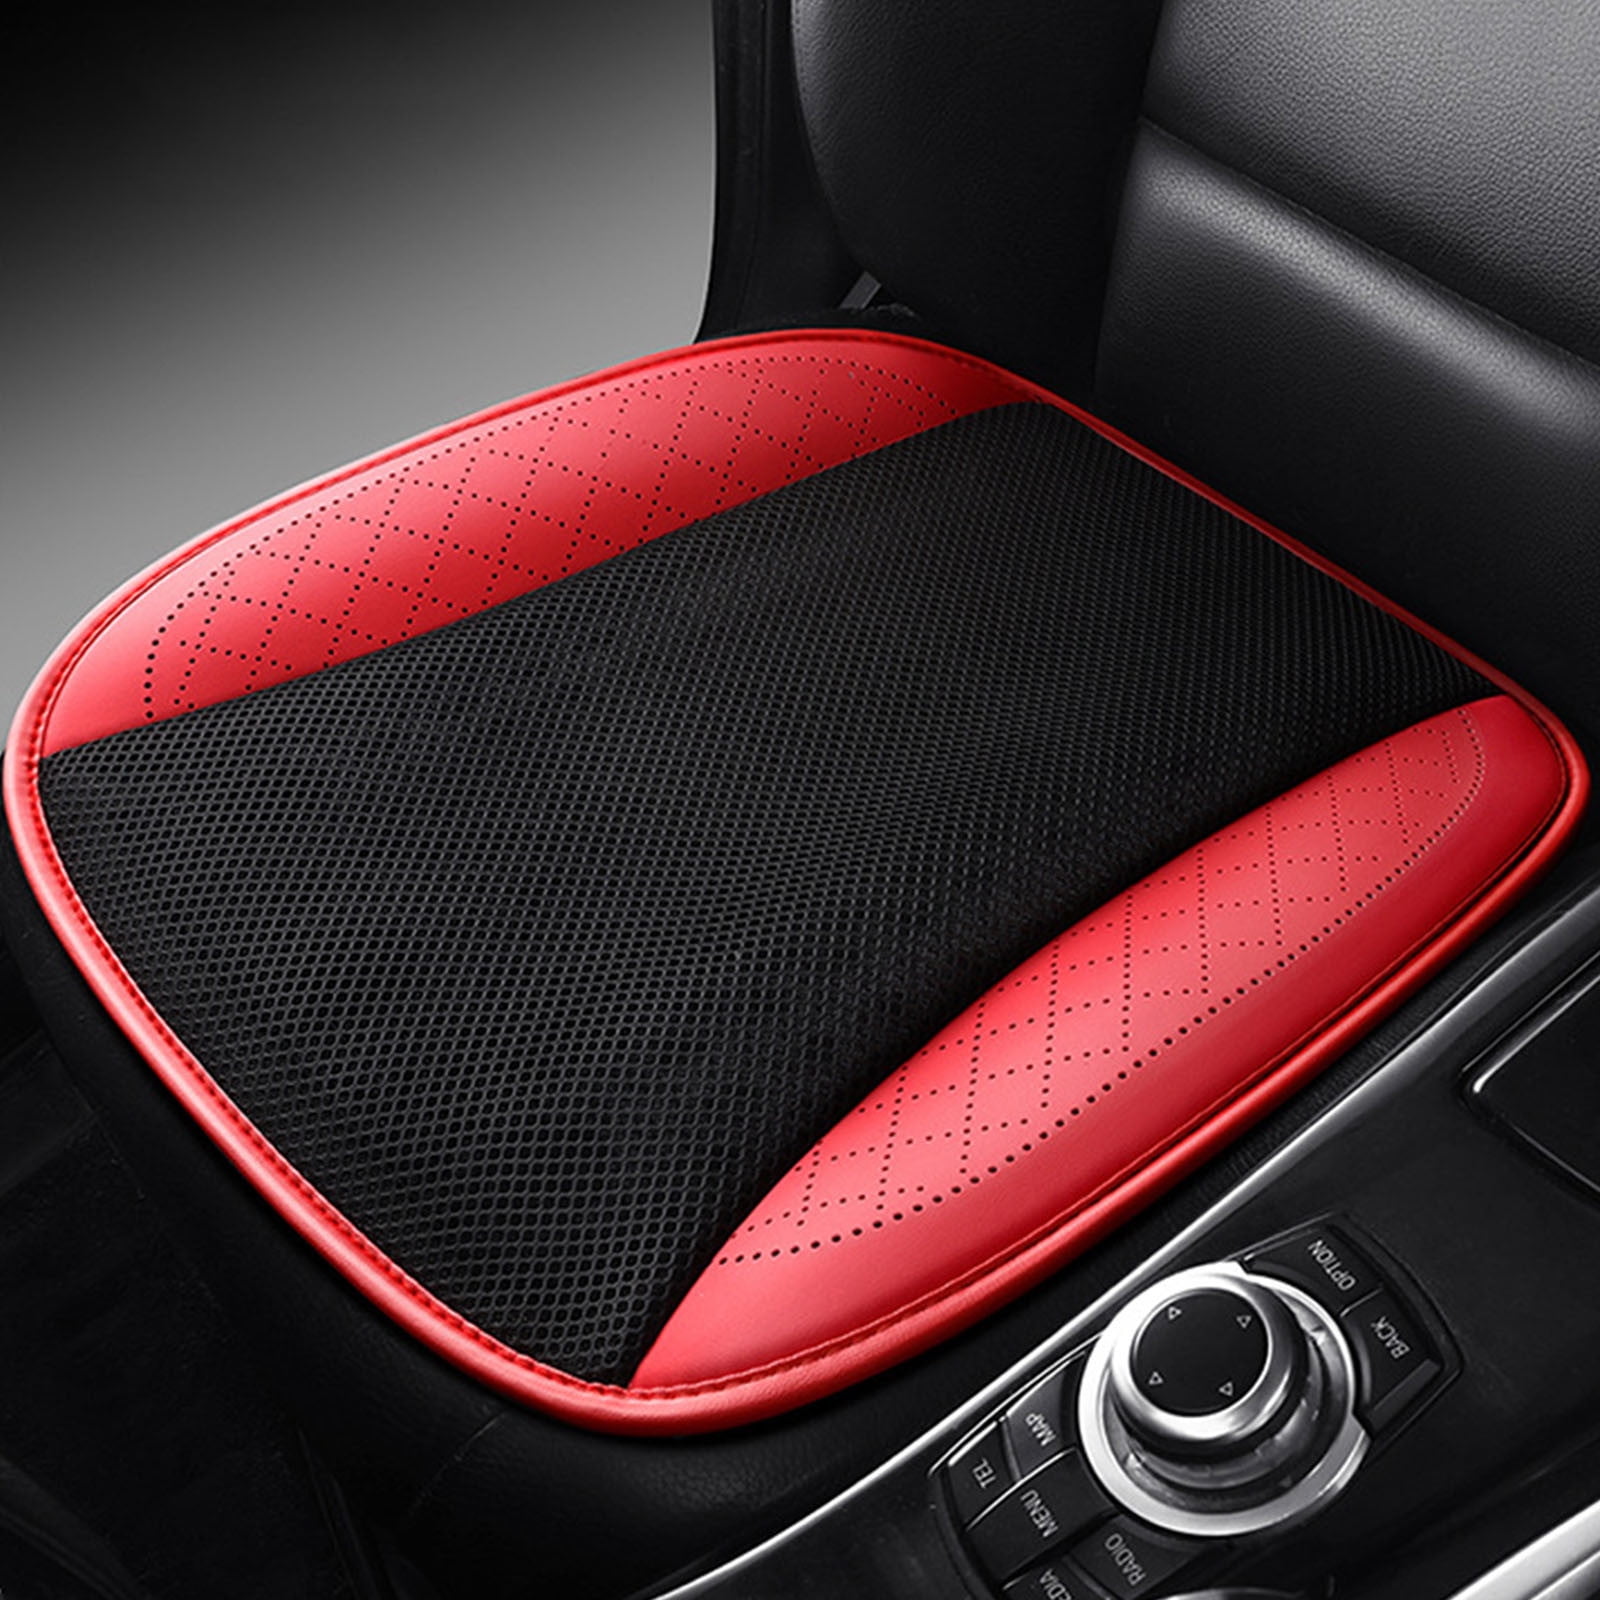 MeiBoAll Standard Size Ventilated Seat Cushion with Lumbar Support, Air  Flow Breathable Back Support Cushion, Car Seat Cushion Cool Pad for Comfort